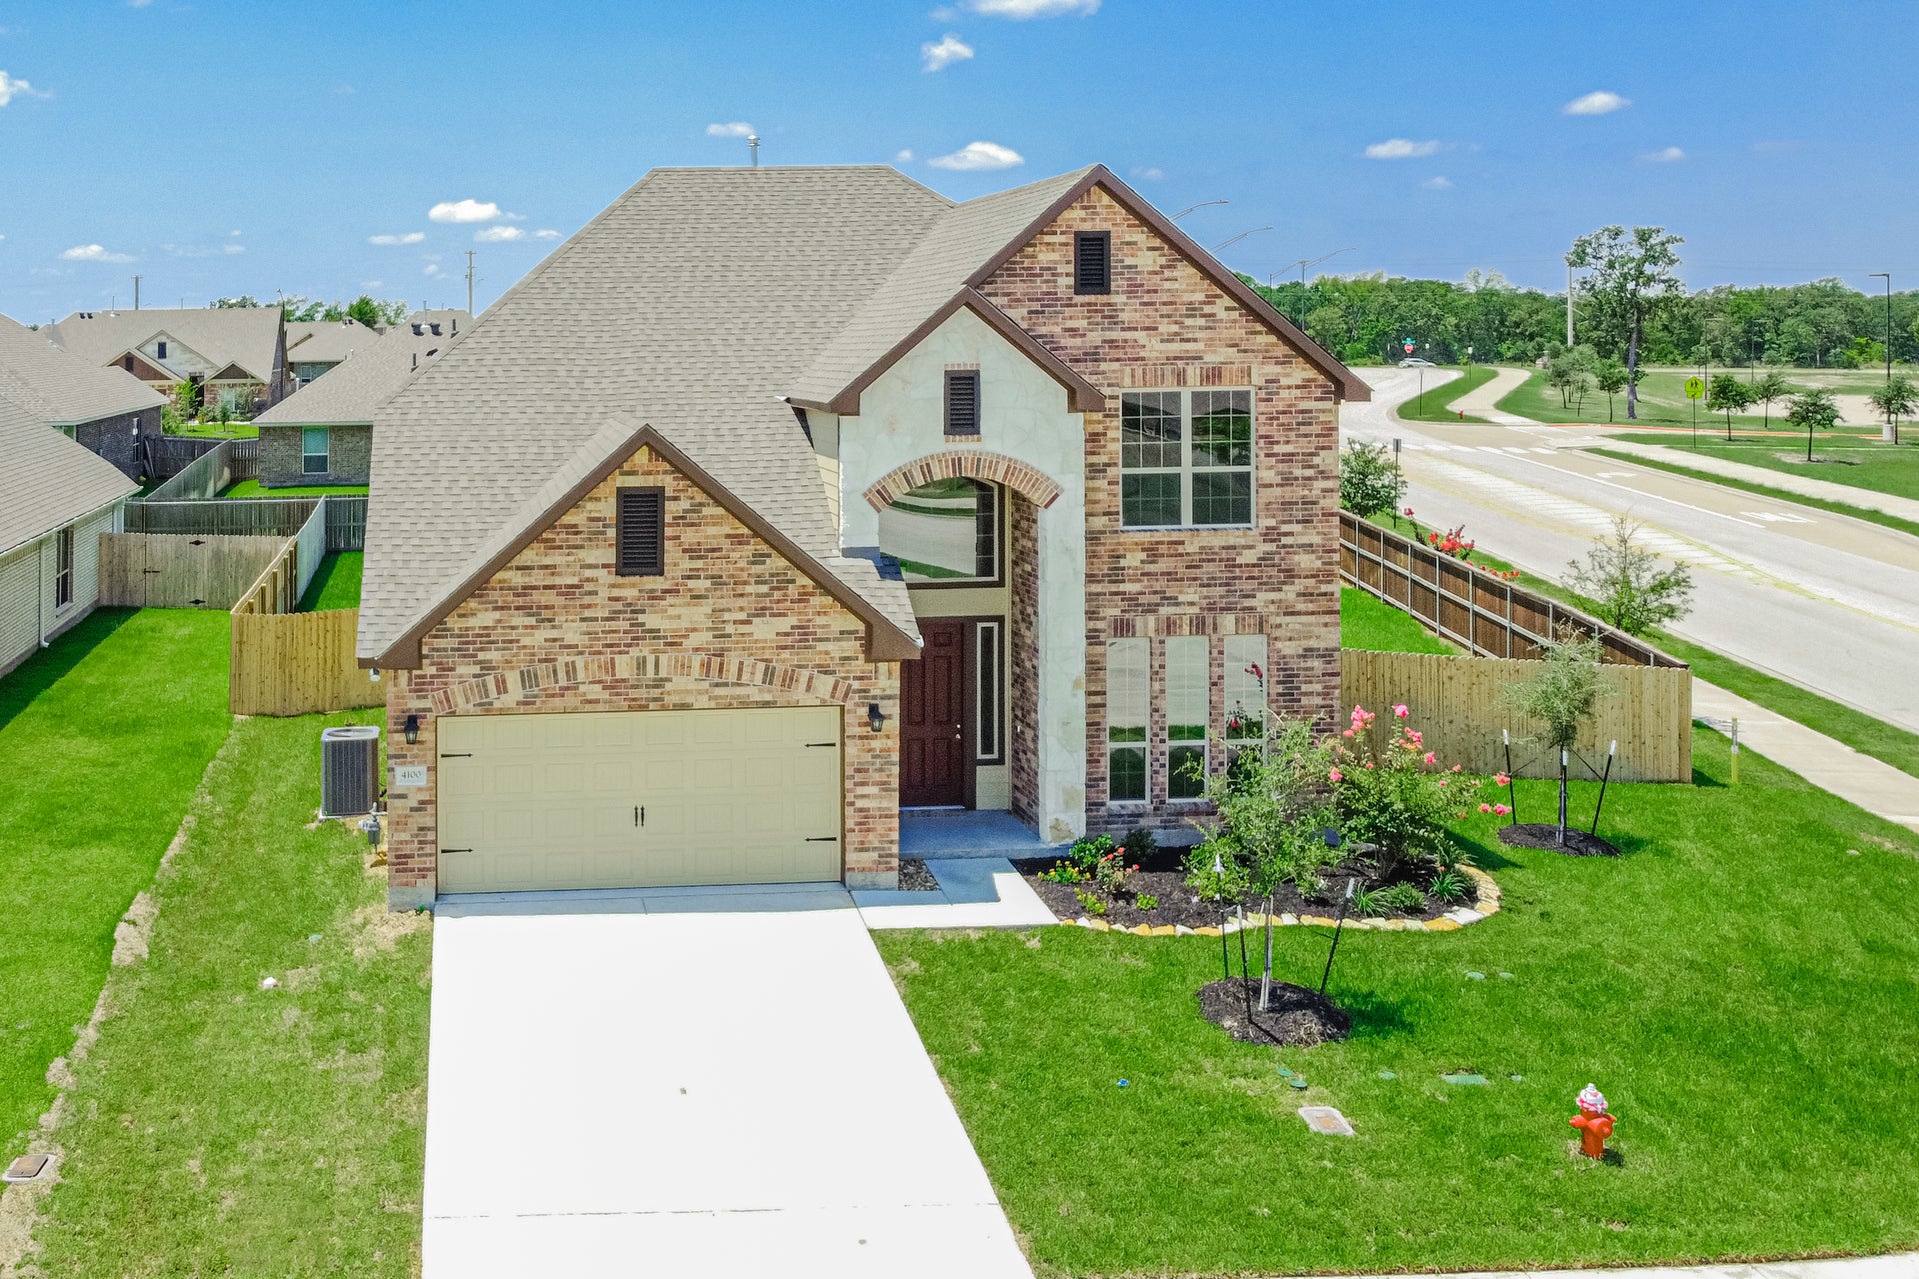 4100 Gregg Court in College Station, TX